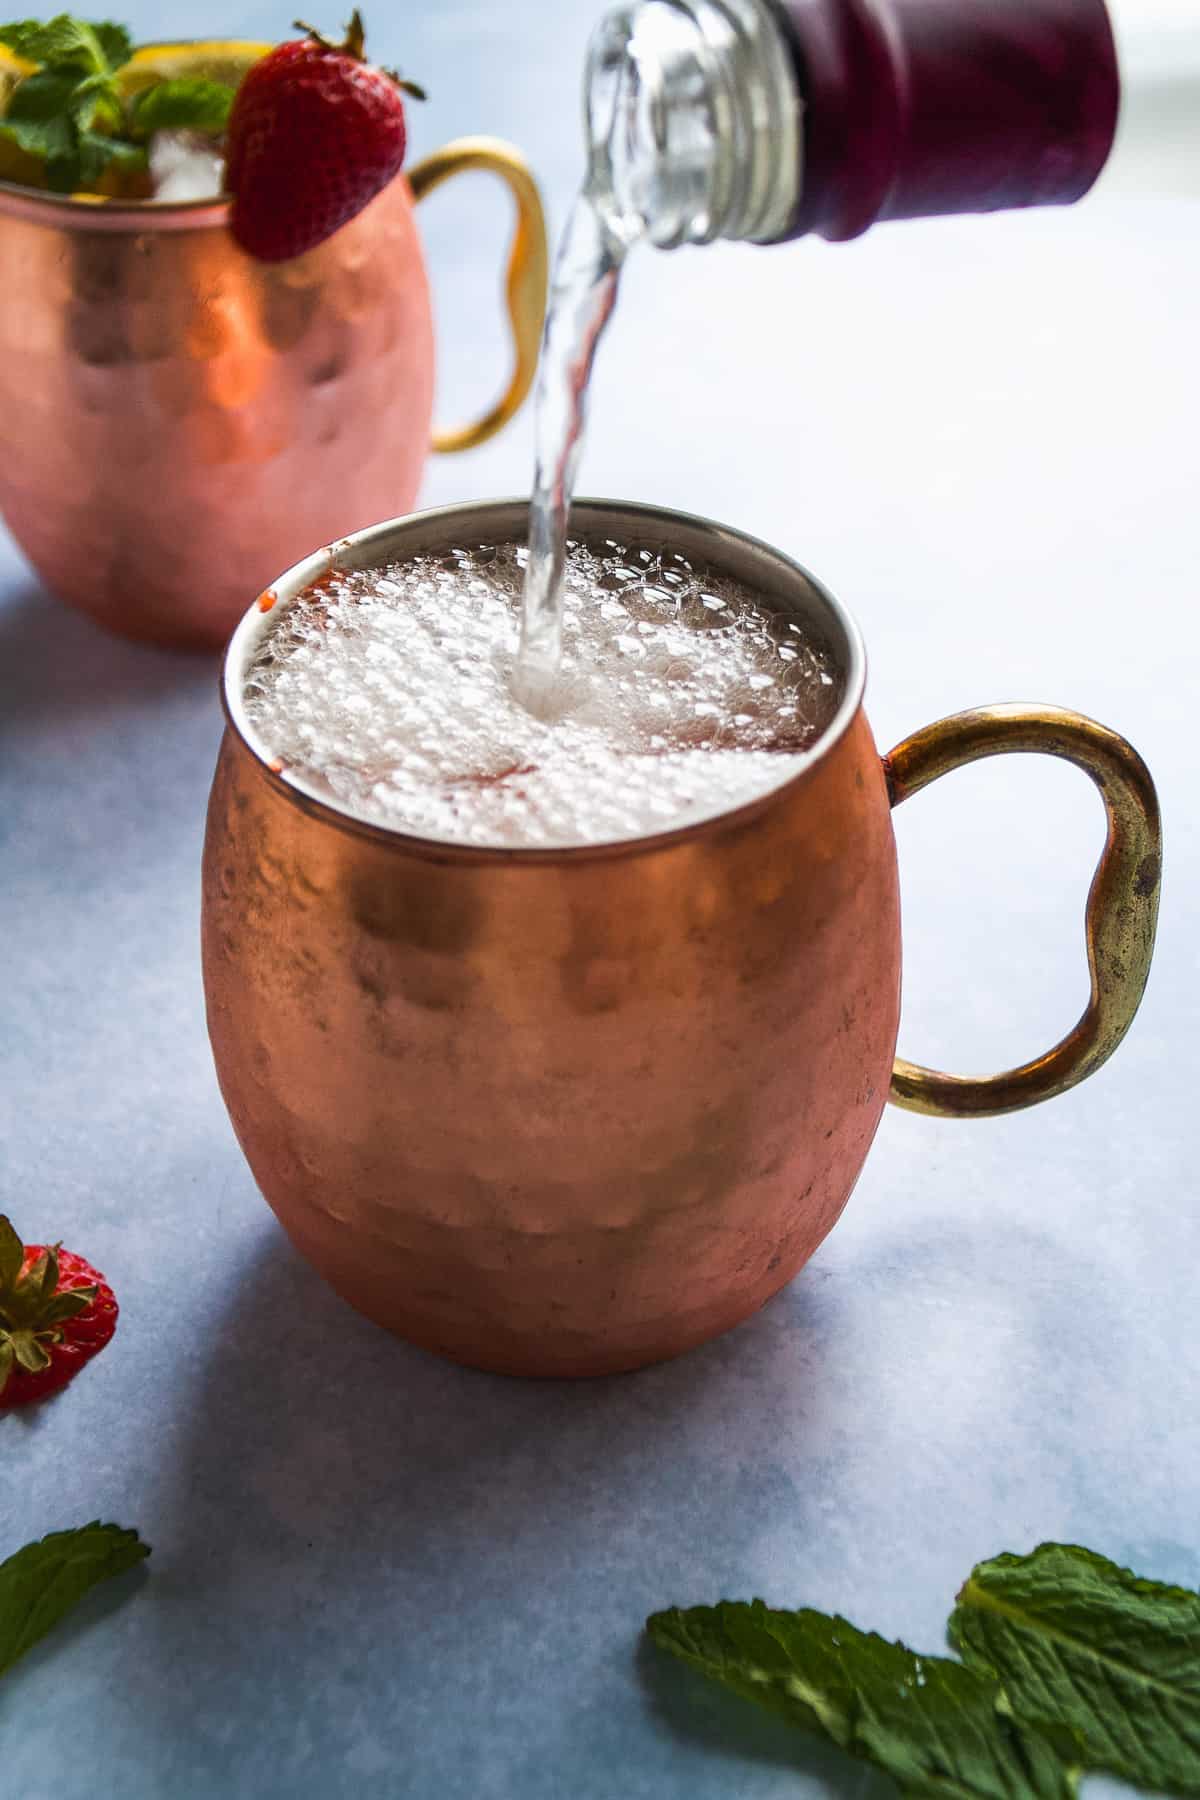 Ginger beer being poured into a copper mug creating bubbles on top.